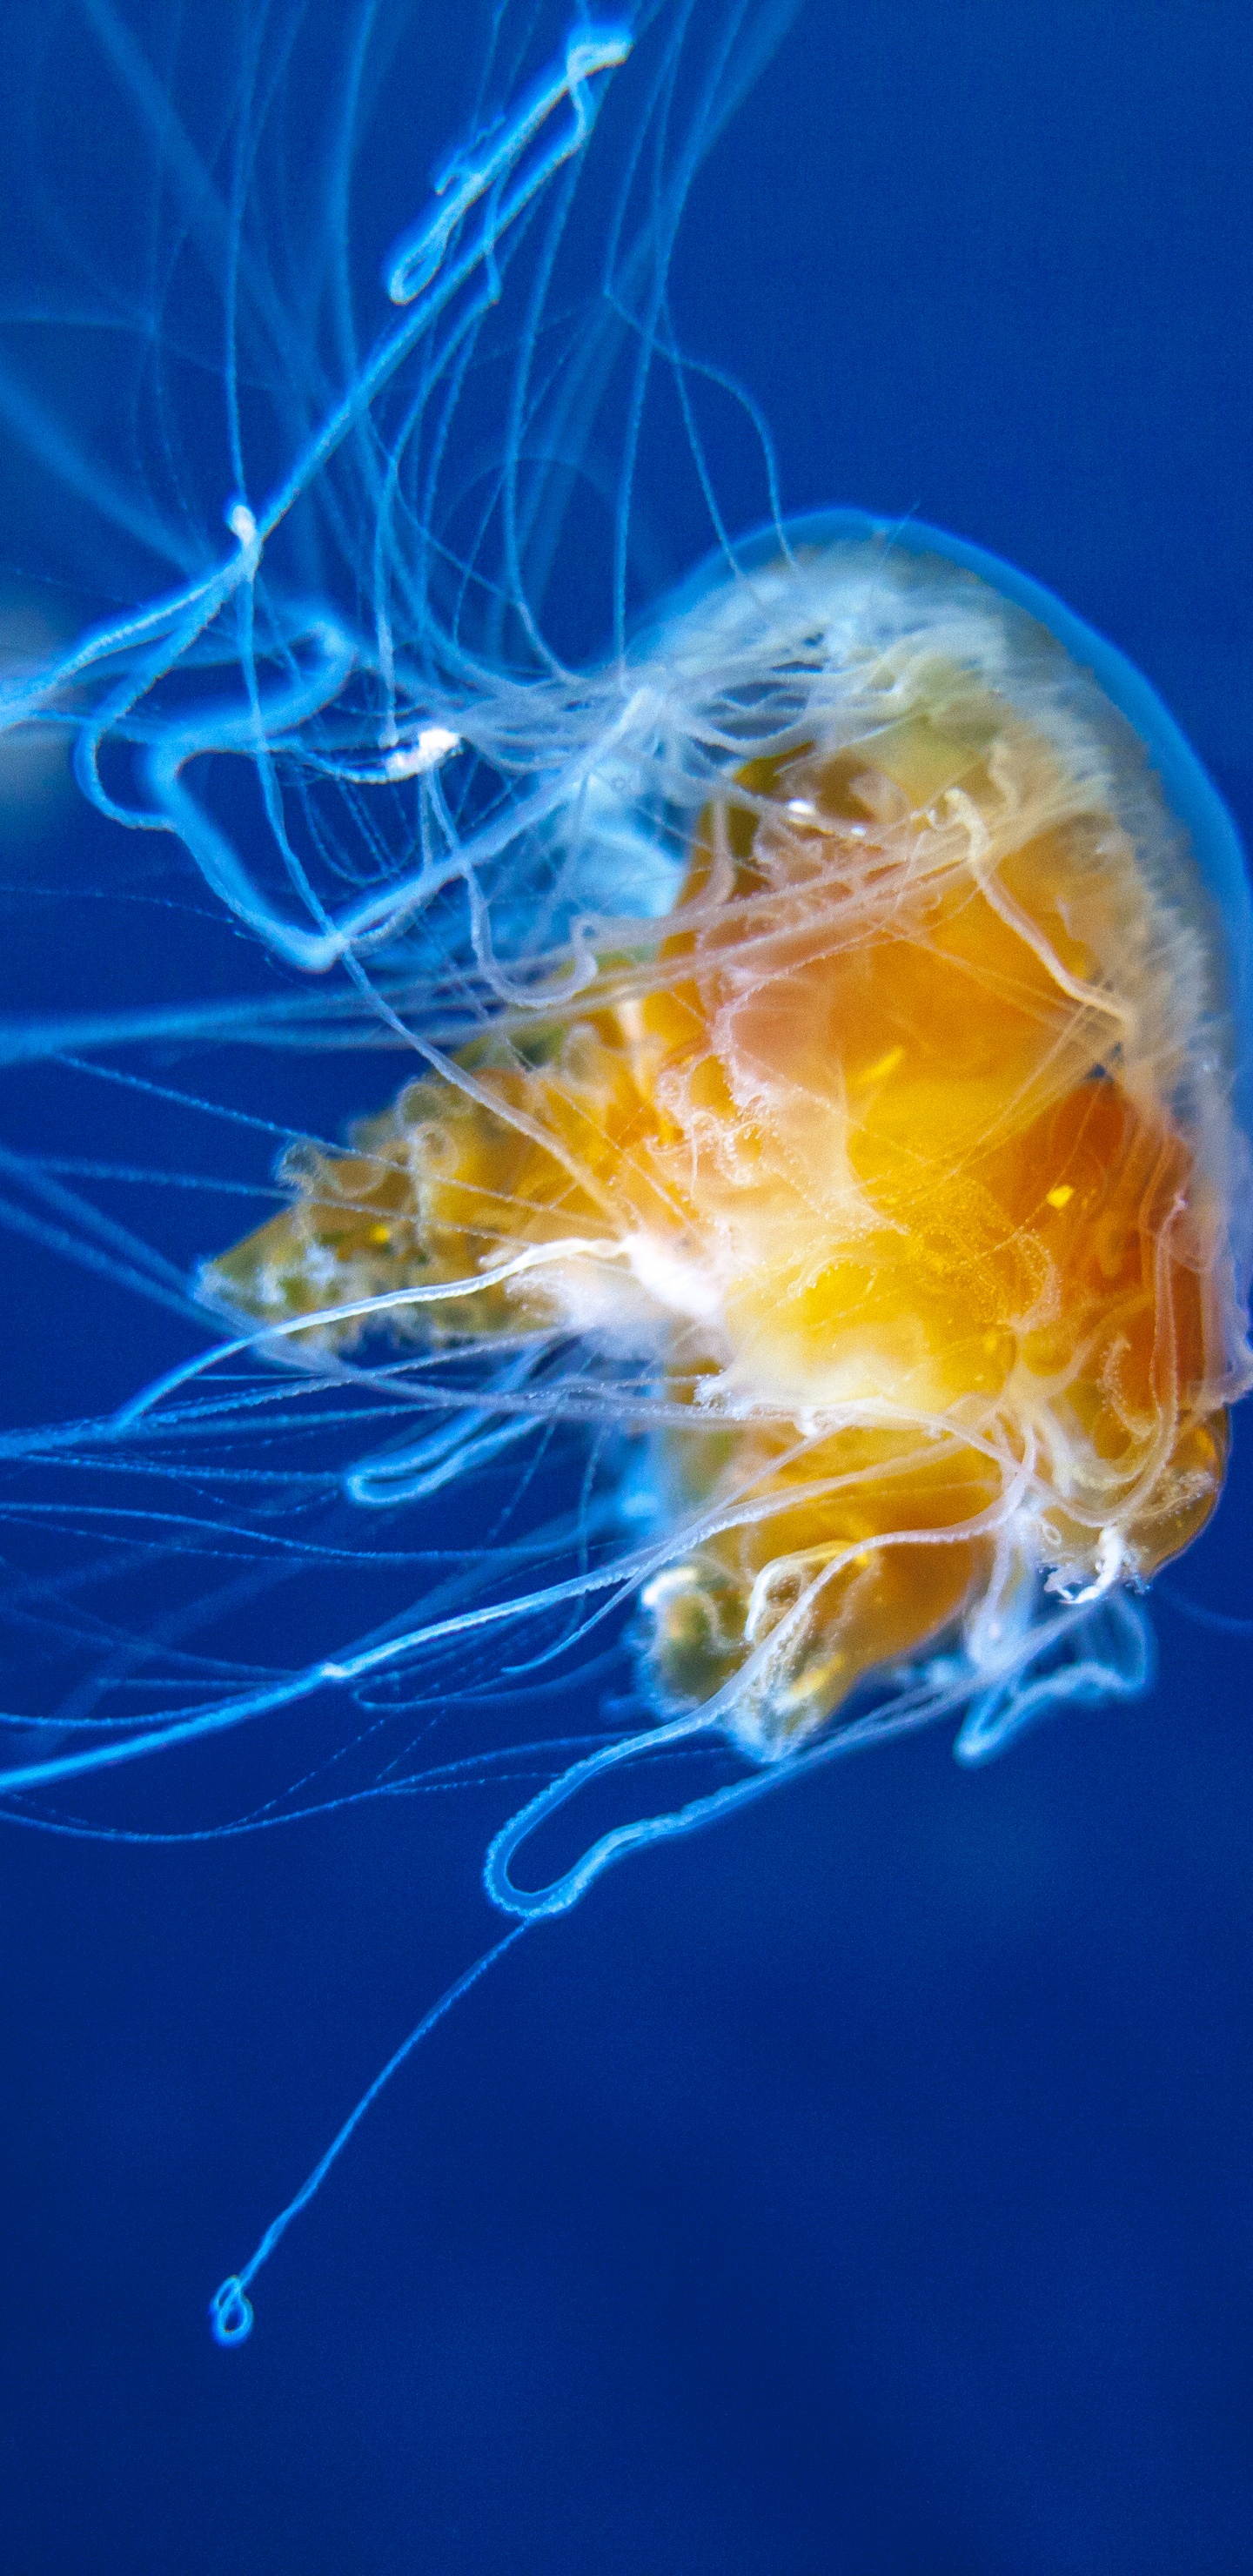 Yellow and White Jellyfish in Blue Water. Wallpaper in 1440x2960 Resolution